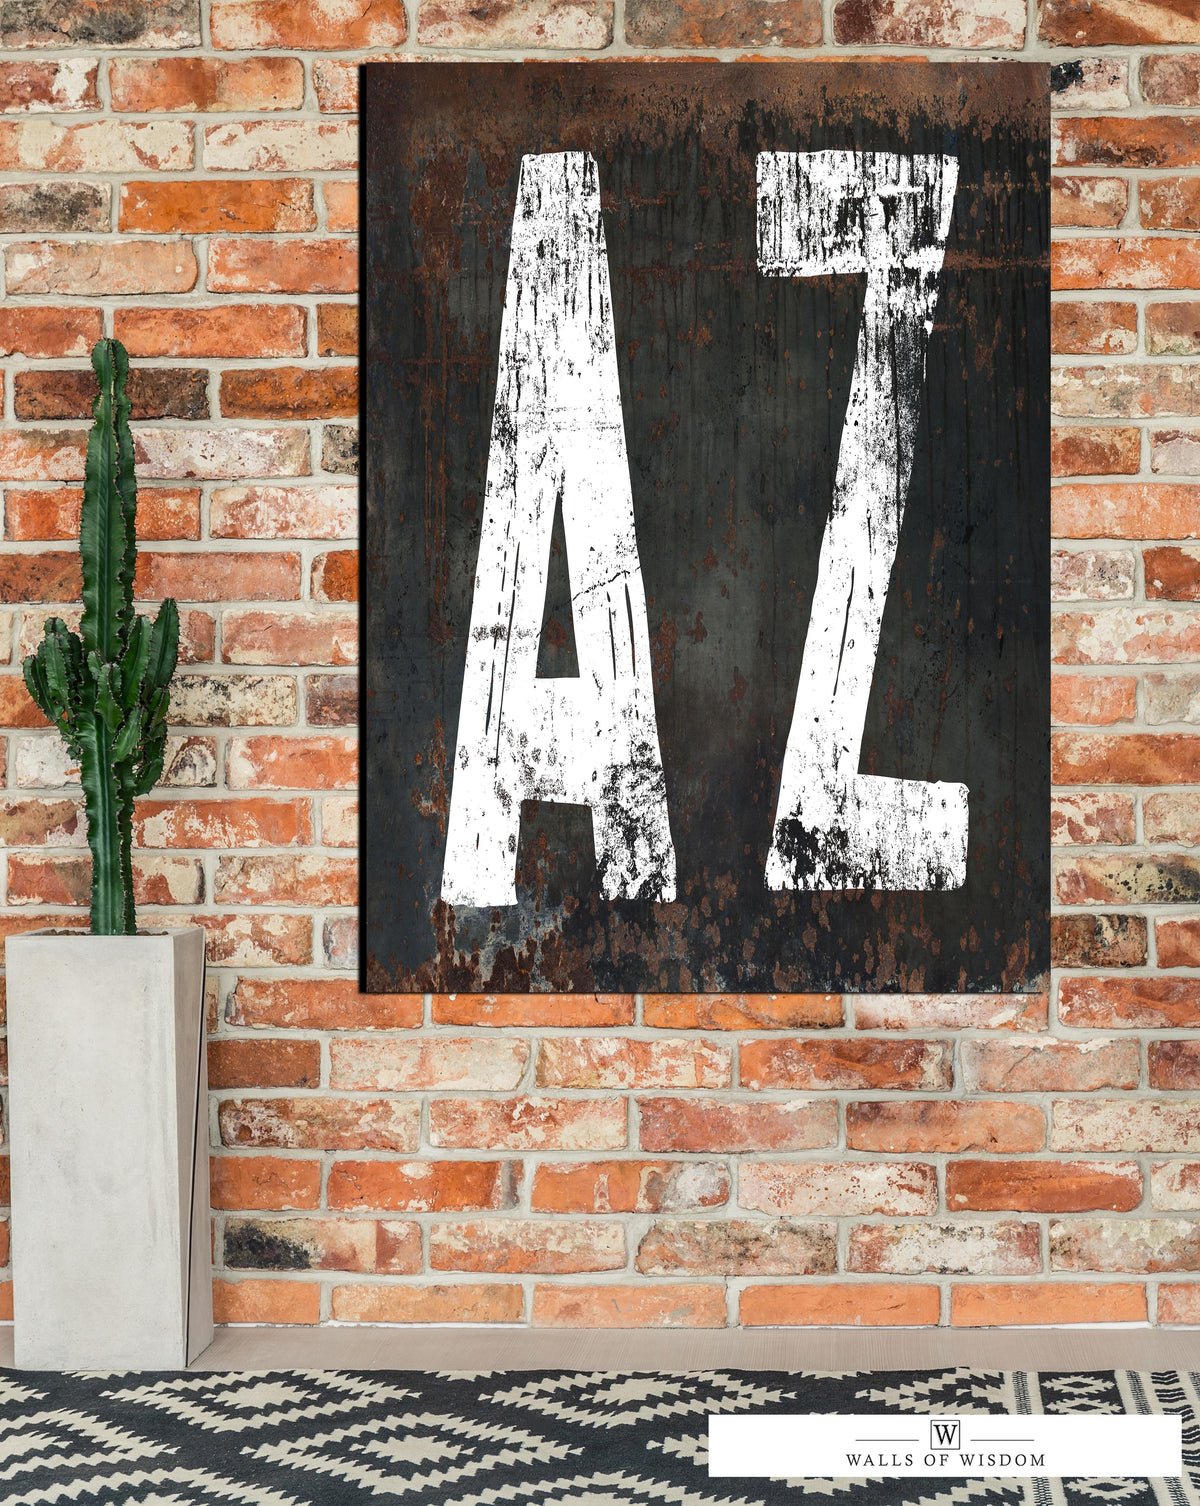 Arizona Home State Western Canvas Wall Art - Rustic Southwest Style  AZ State Sign Typographic Art Print